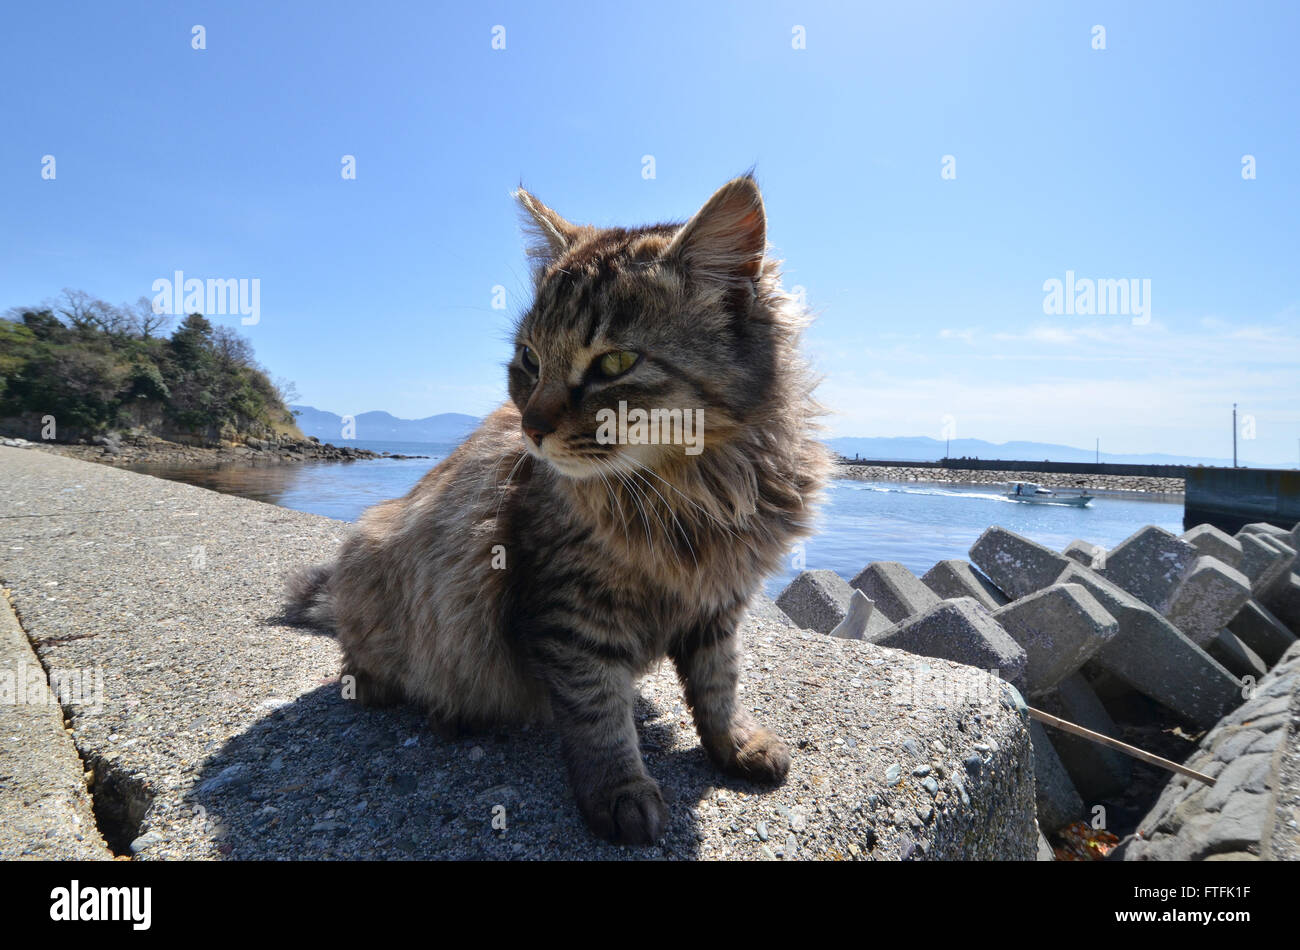 Tuesday. 22nd Mar, 2016. An army of cats inhabit the cat paradise of Aoshima island, off the coast of Ozu city in Ehime prefecture on Tuesday, March 22, 2016. More than 100 cats live on the tiny island which has only 16 elderly residents. The cats were originally brought to the island to kill the mice infesting local fishermen's boats. © Yoshio Tsunoda/AFLO/Alamy Live News Stock Photo